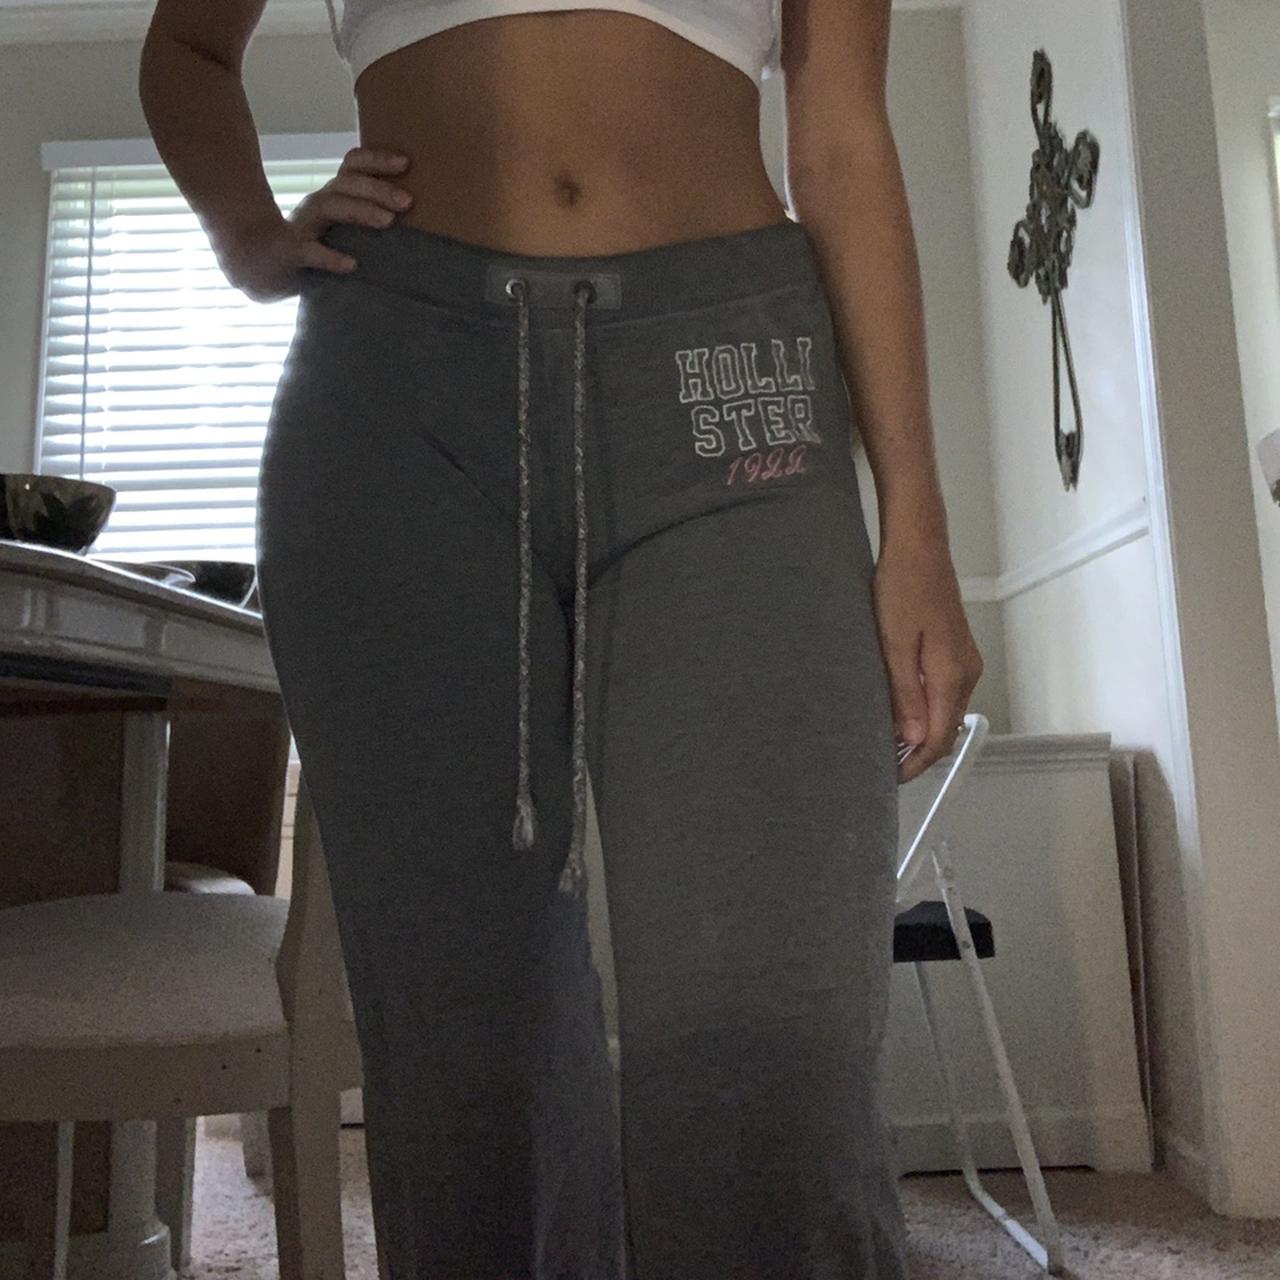 cute and comfy hollister sweatpants extremely warm - Depop